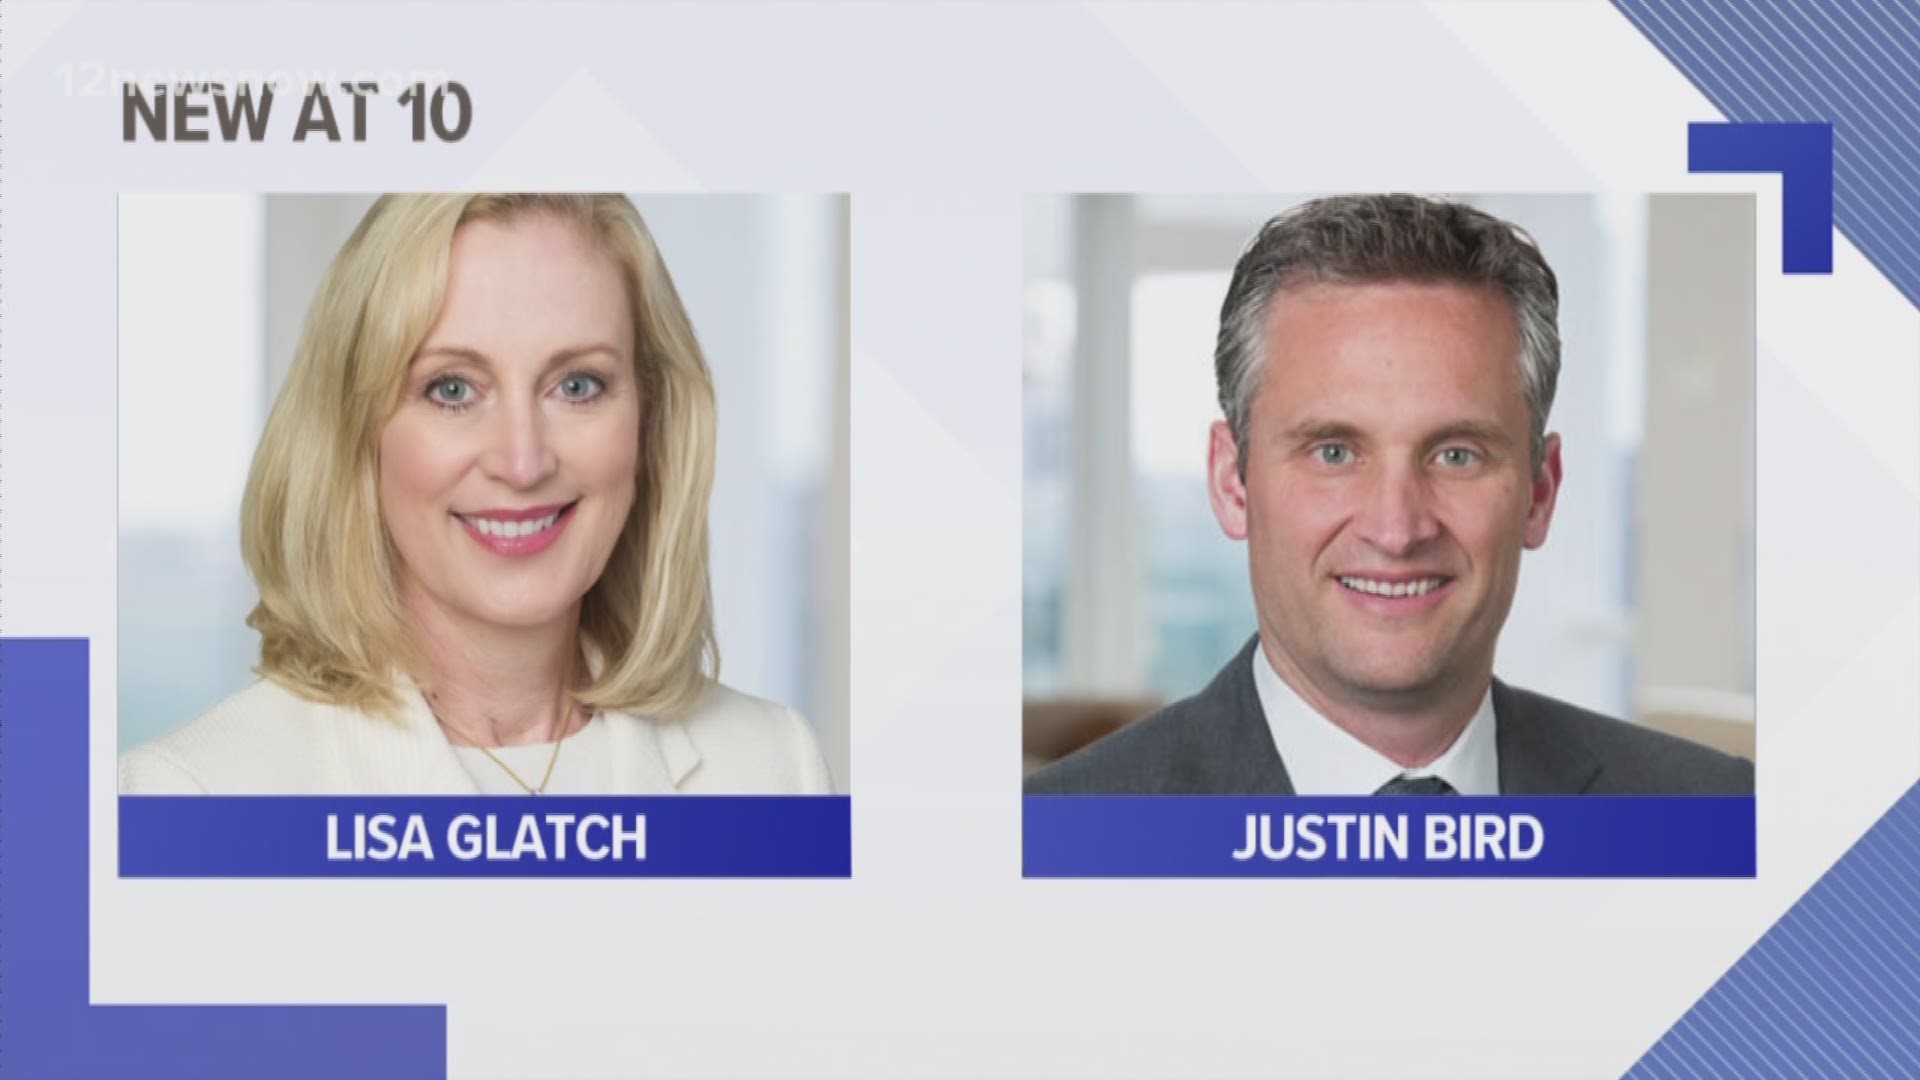 Lisa Glatch has been named COO and Justin Bird has been named president.